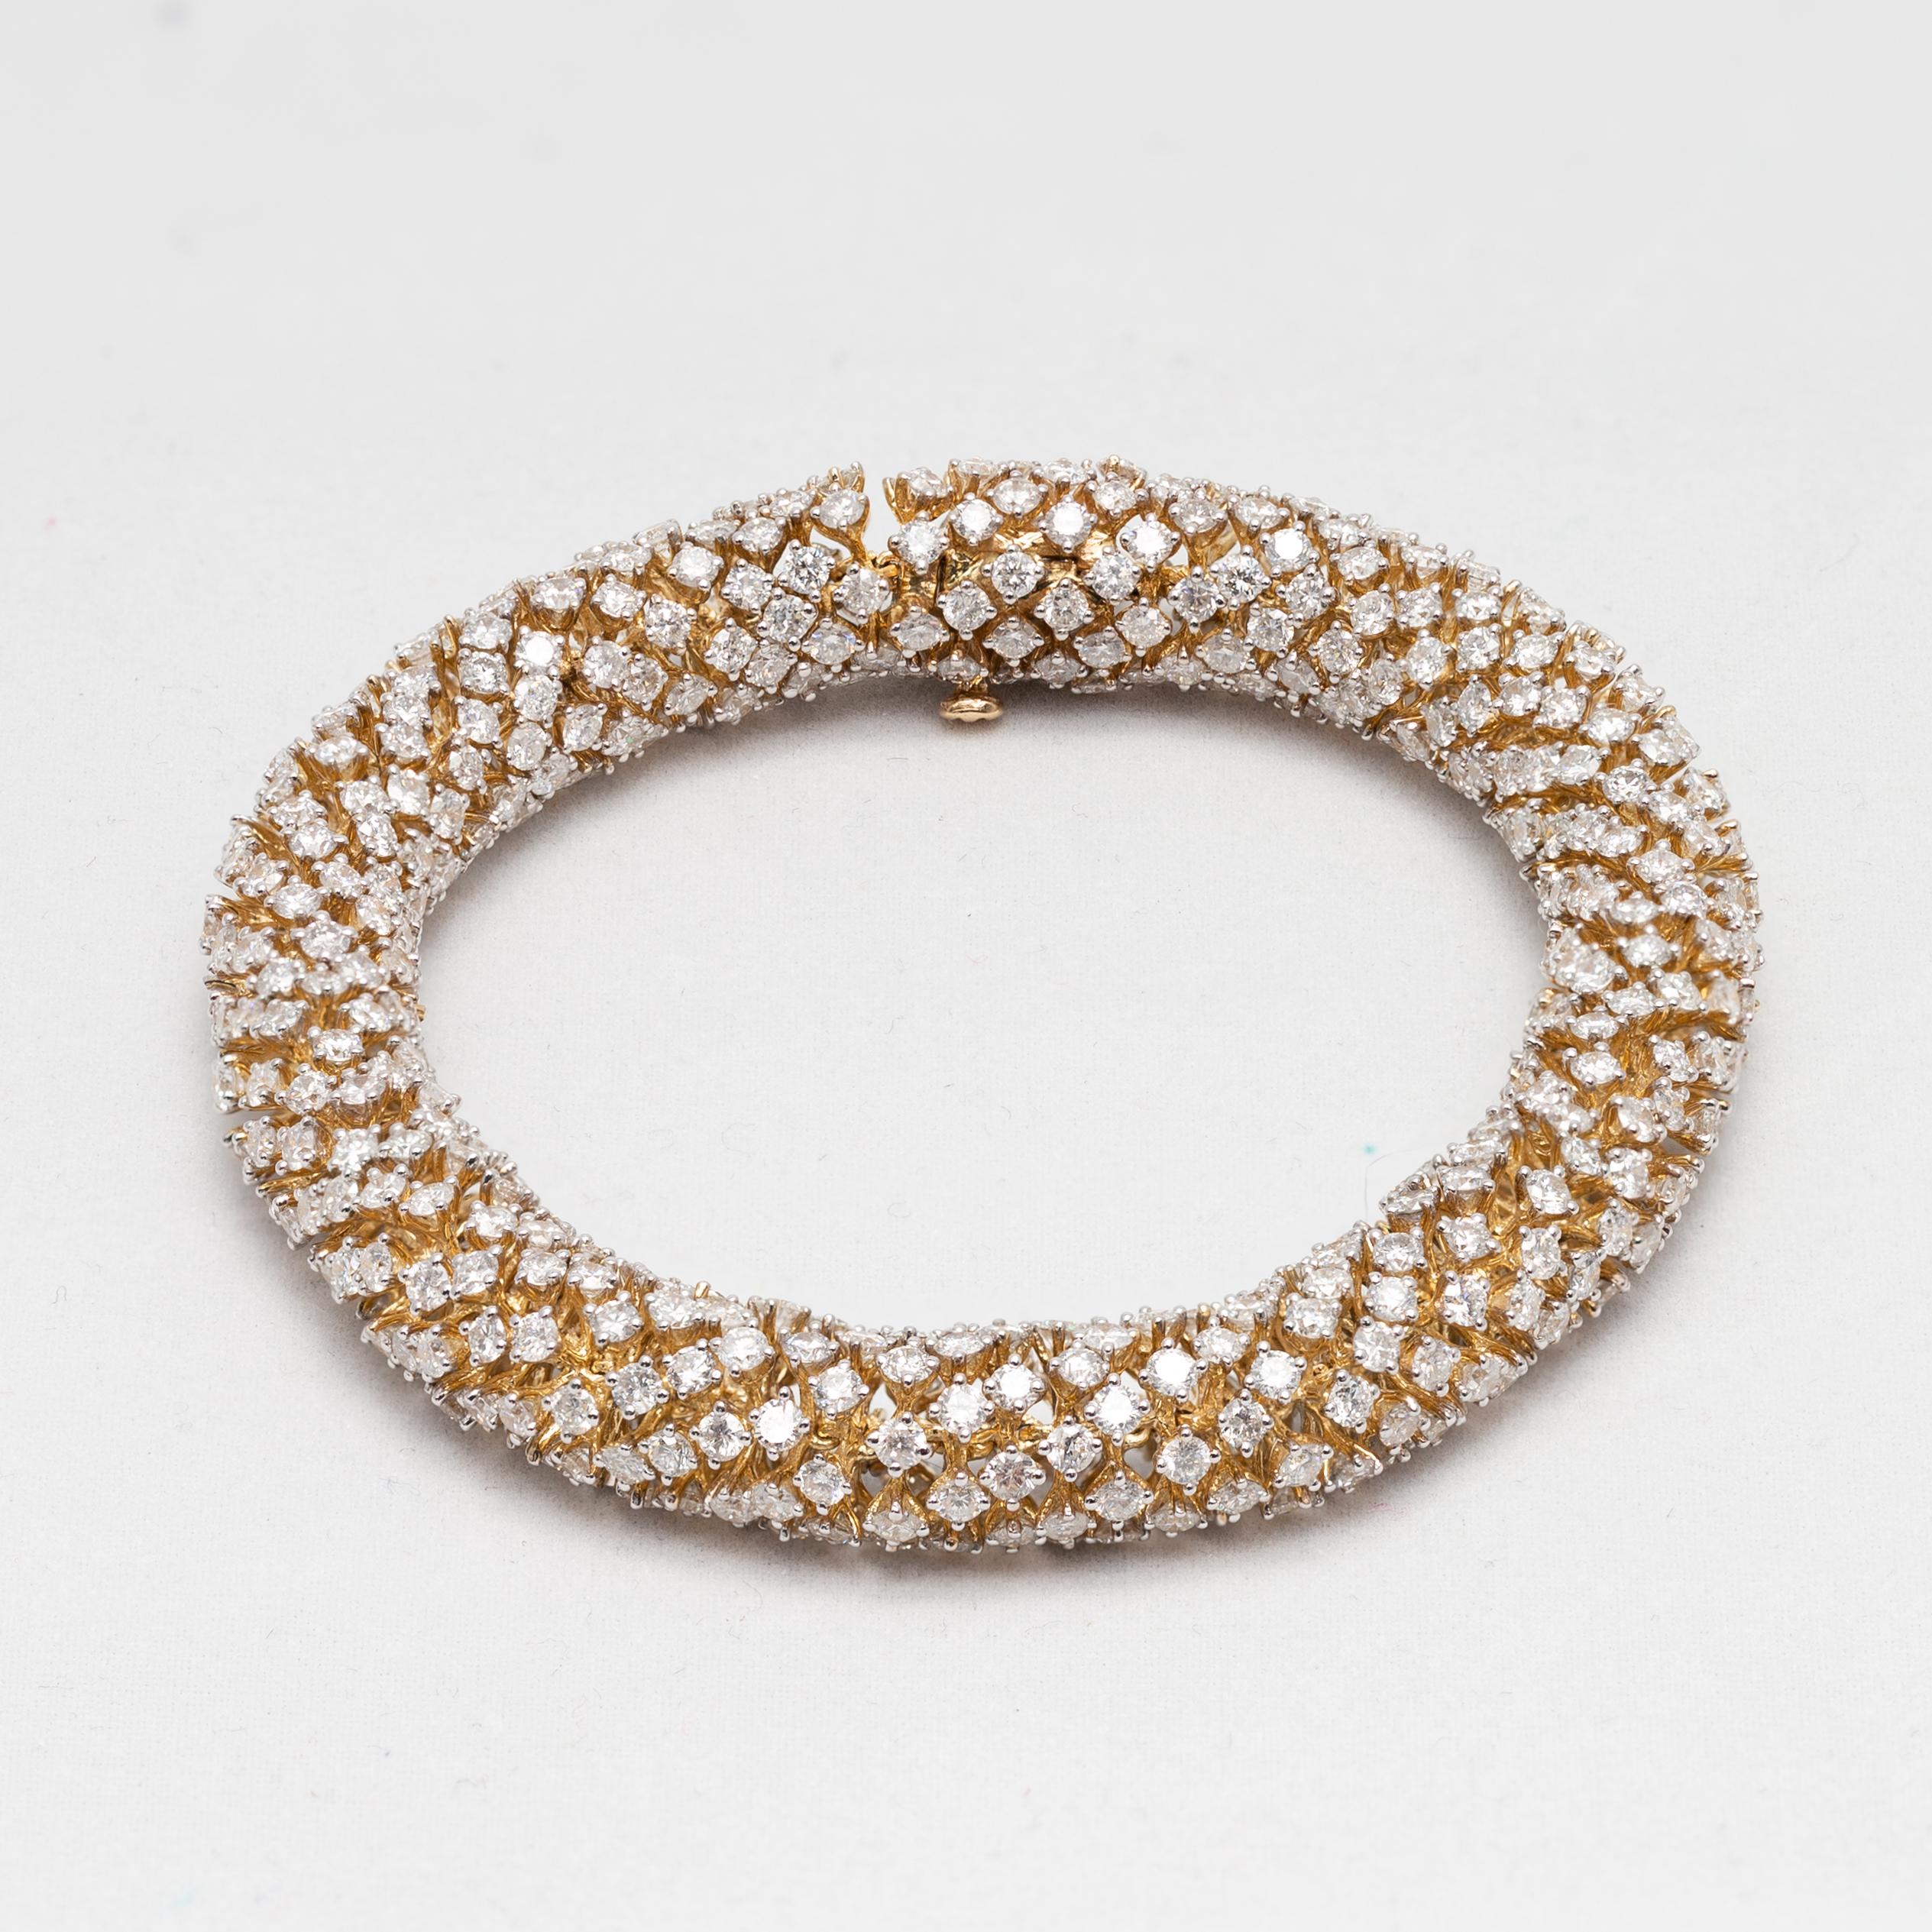 A 14 karat Modern yellow Gold and Diamond semi-flexible bracelet with serpentine movement. Our eyes are immediately drawn to this spectacular semi-flexible bracelet, set in 14 karat yellow Gold and accented with a delicate rhythm of sparkly Diamonds